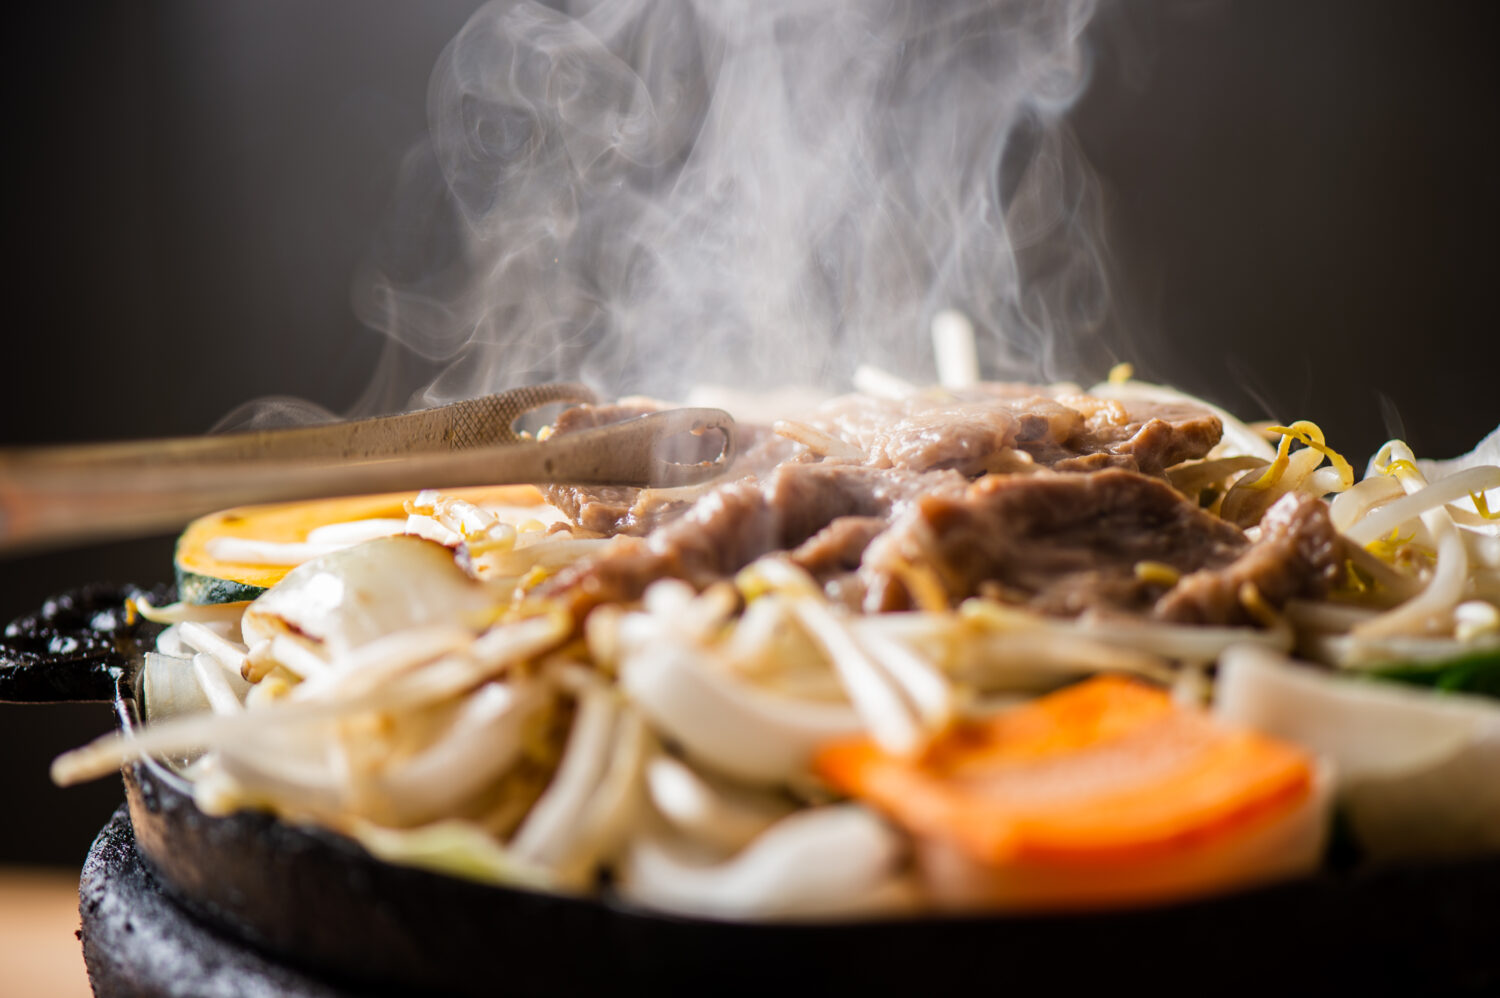 Grill the ajitsuke niku (marinated meat) with steam from the vegetables